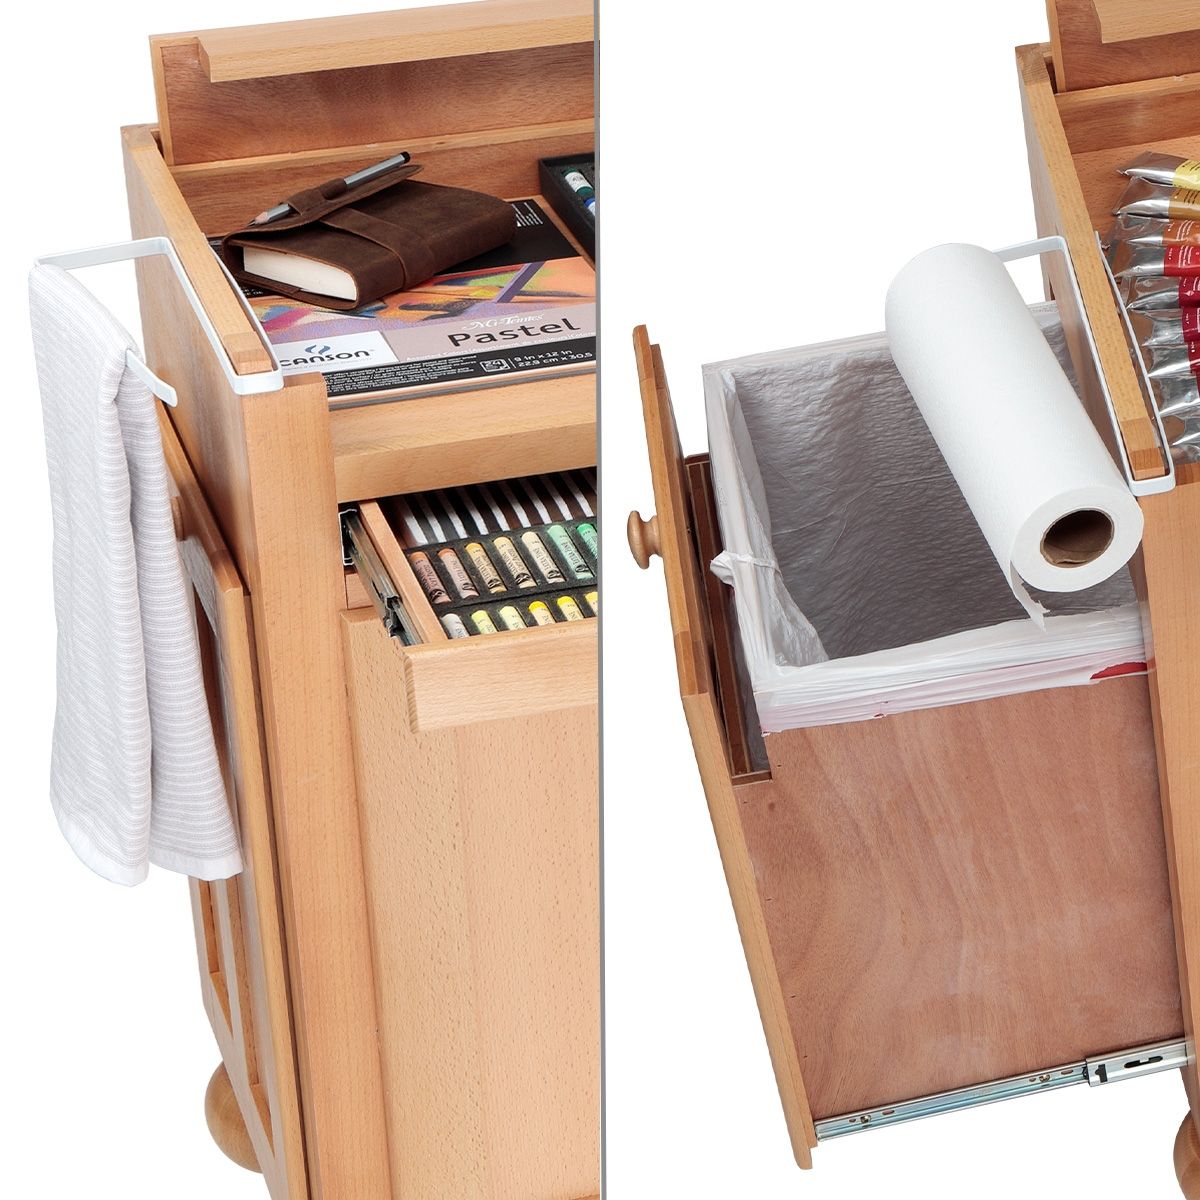 Paper or hand towel holder can be installed over the trash bin